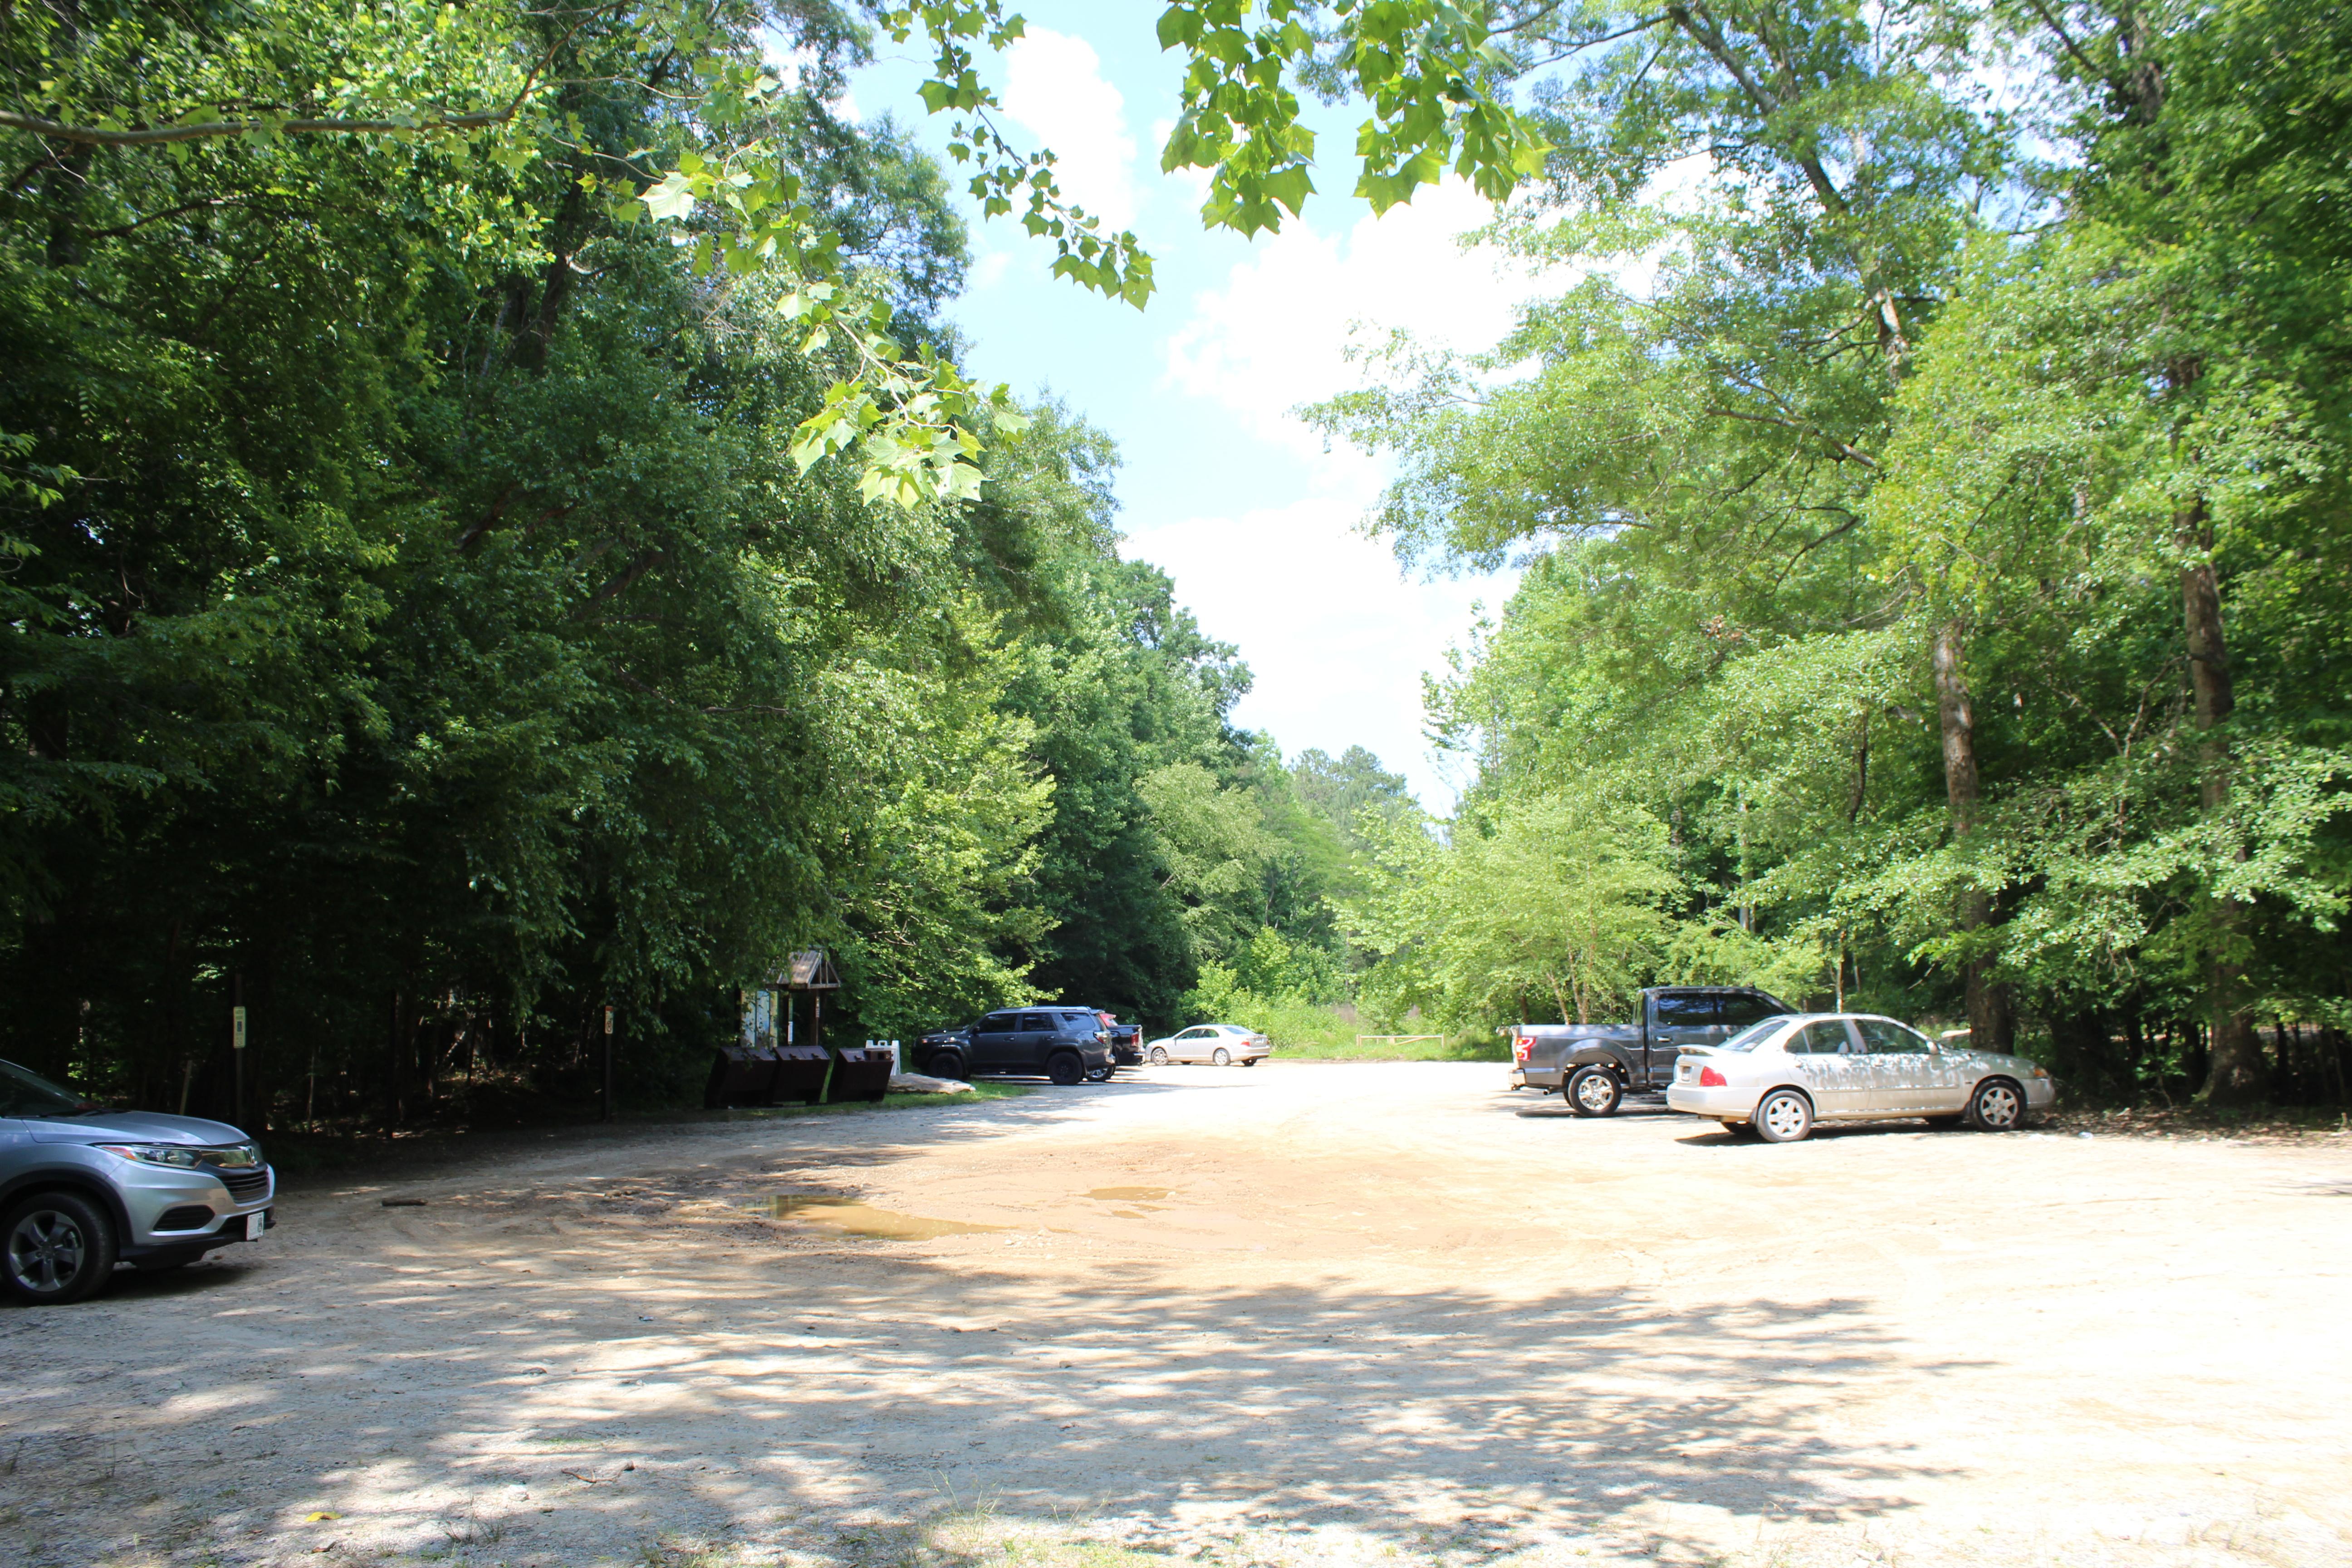 Gravel parking lot with several cars and trucks and mature trees along edge of lot.